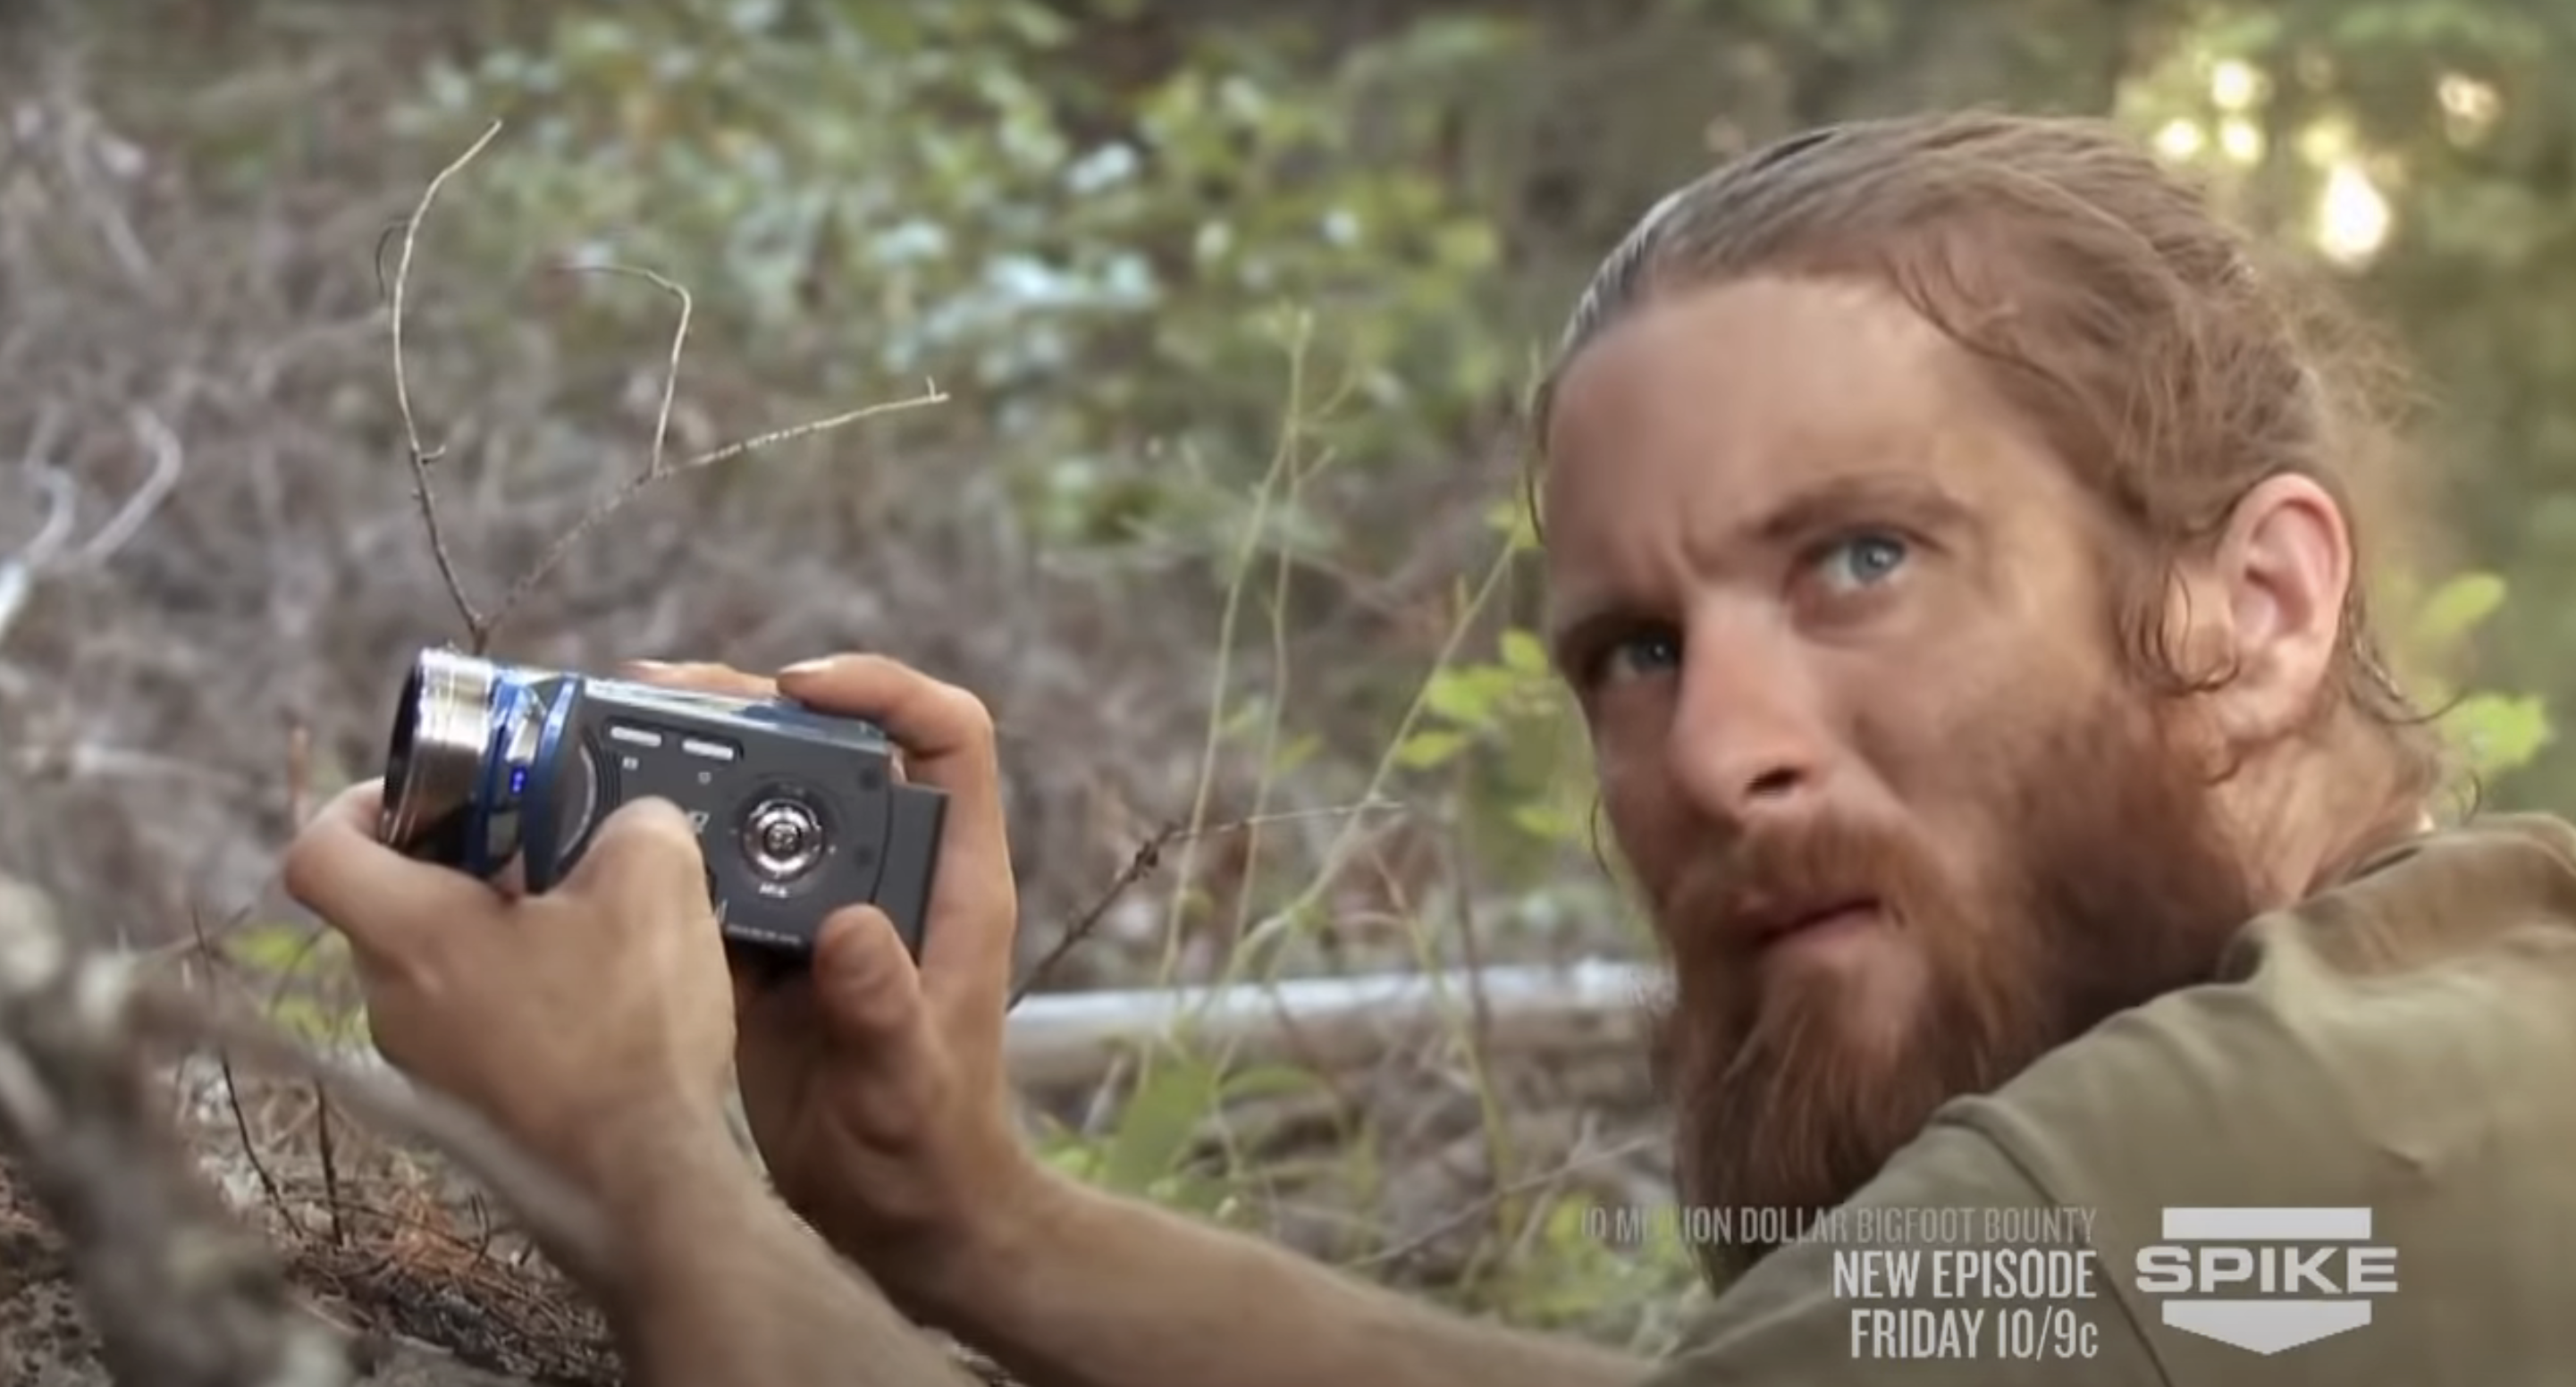 Close=up of a man with a beard outside holding a small camera